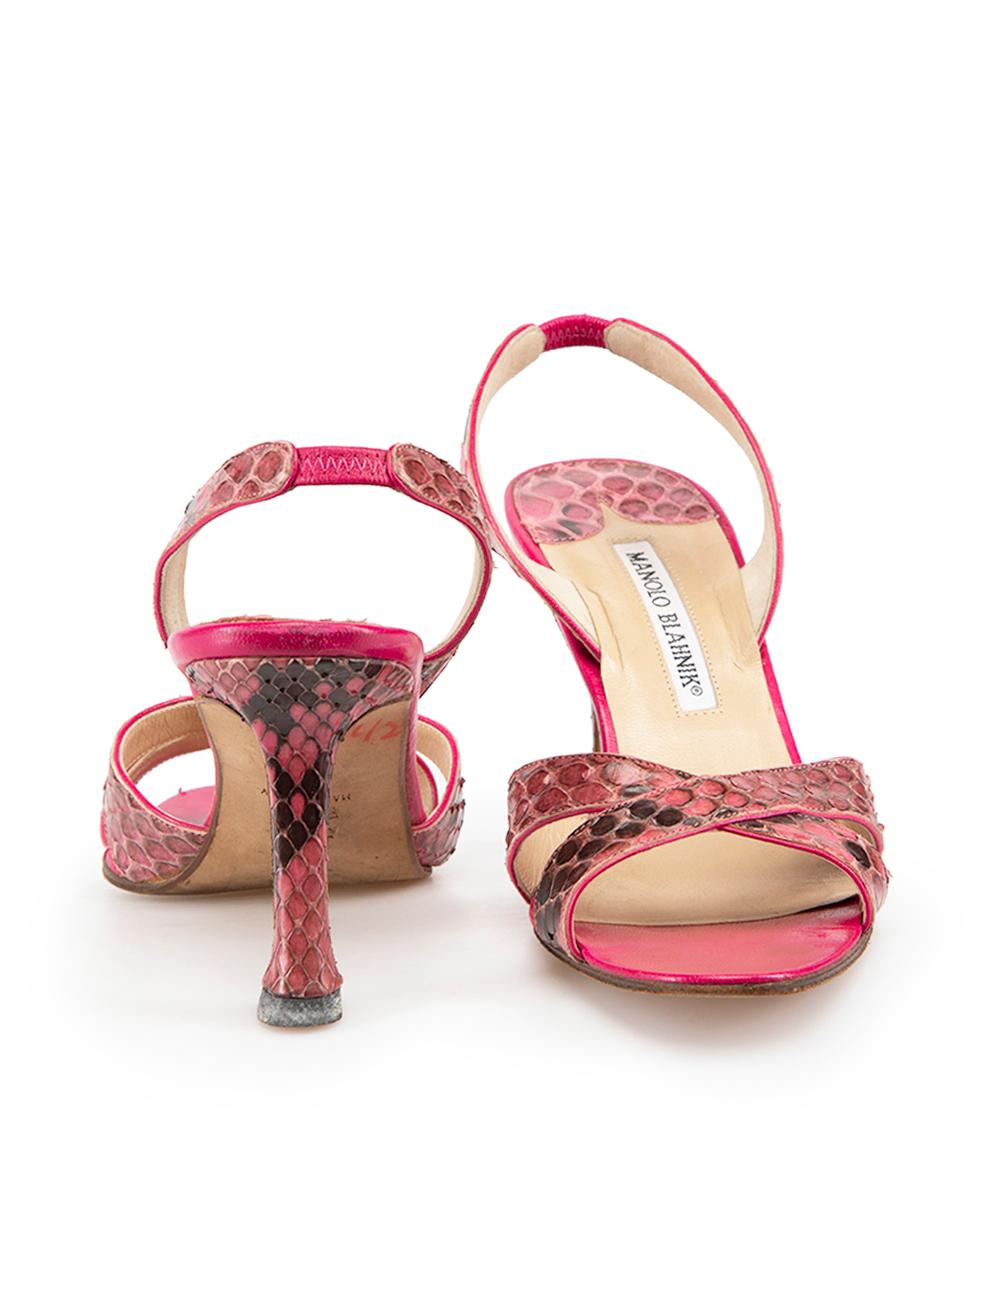 Manolo Blahnik Pink Snakeskin Slingback Sandals Size IT 37 In Excellent Condition For Sale In London, GB